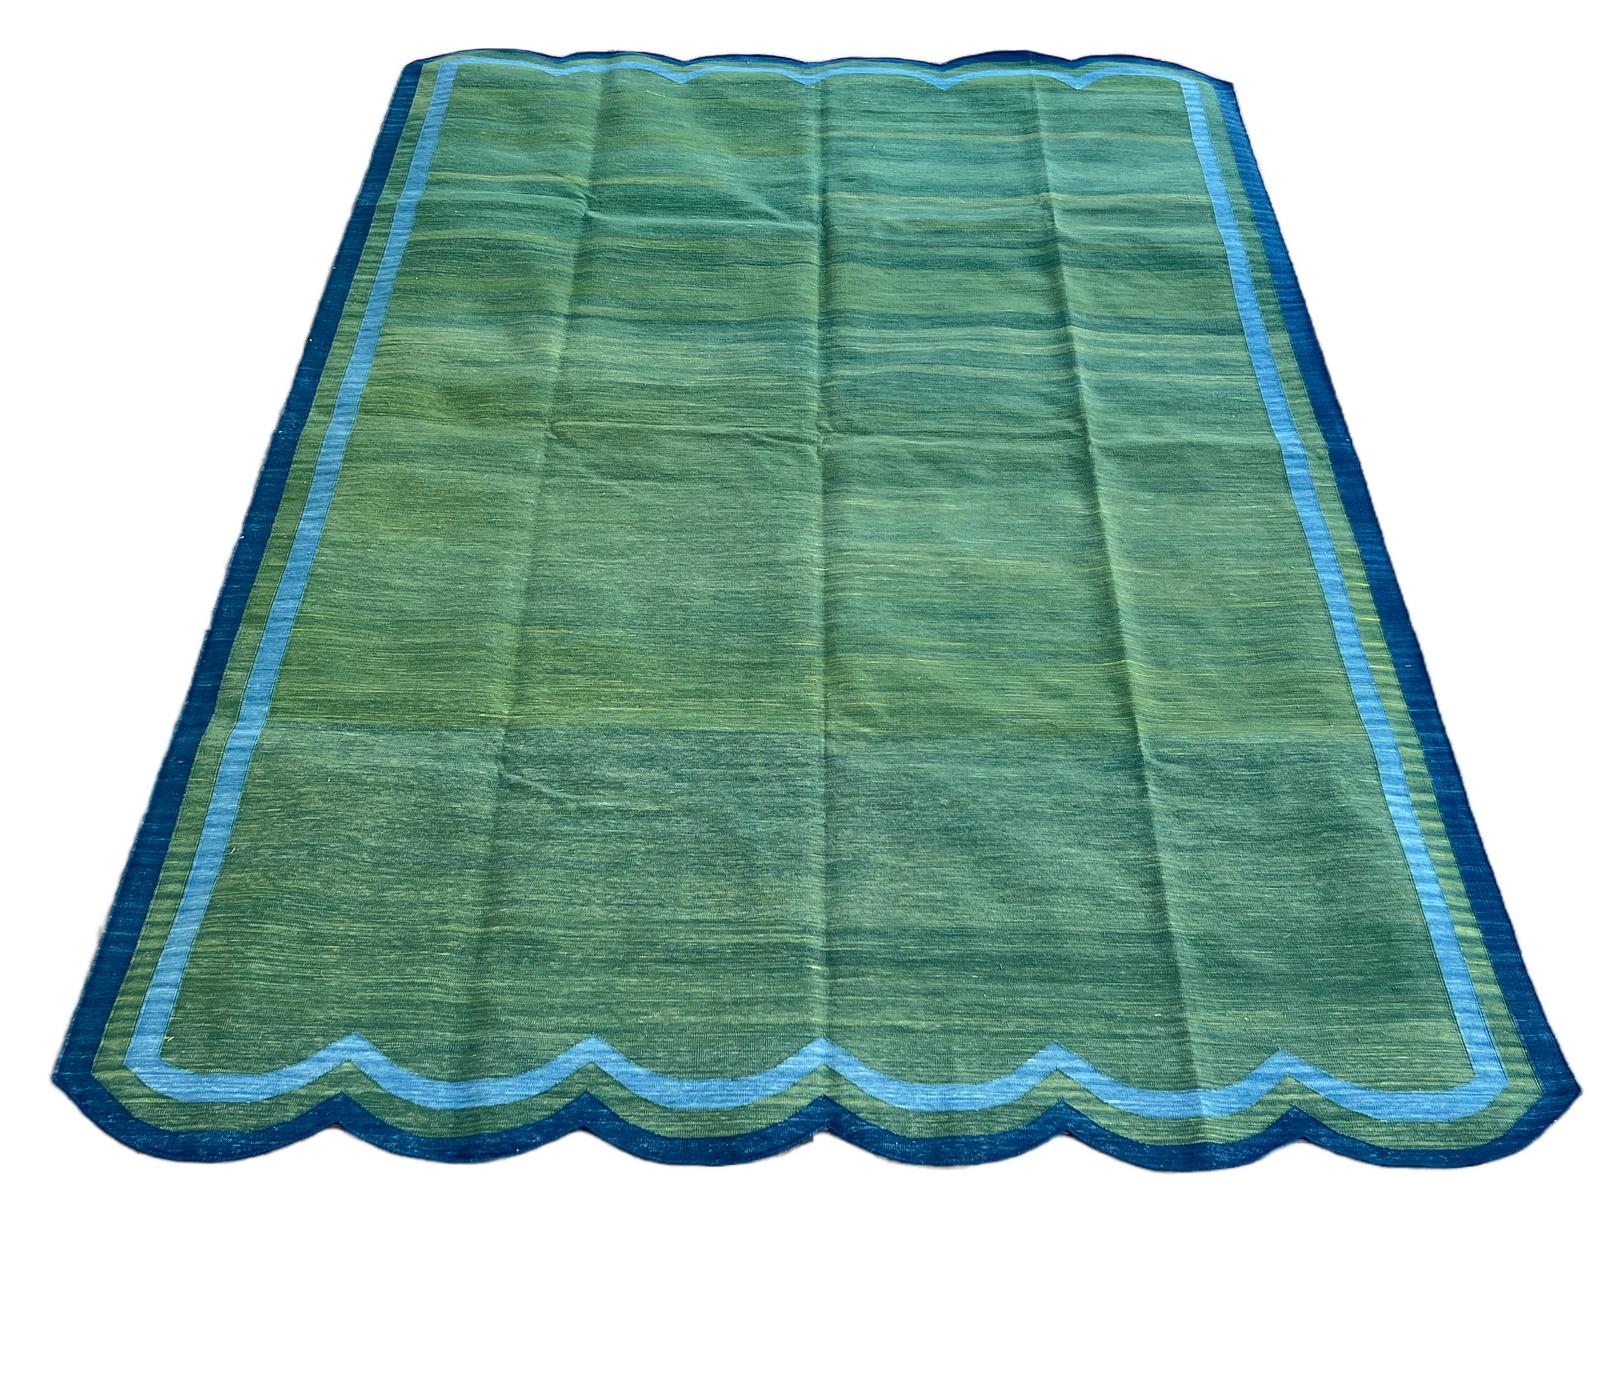 Handmade Cotton Area Flat Weave Rug, 6x9 Green And Blue Scallop Striped Dhurrie In New Condition For Sale In Jaipur, IN